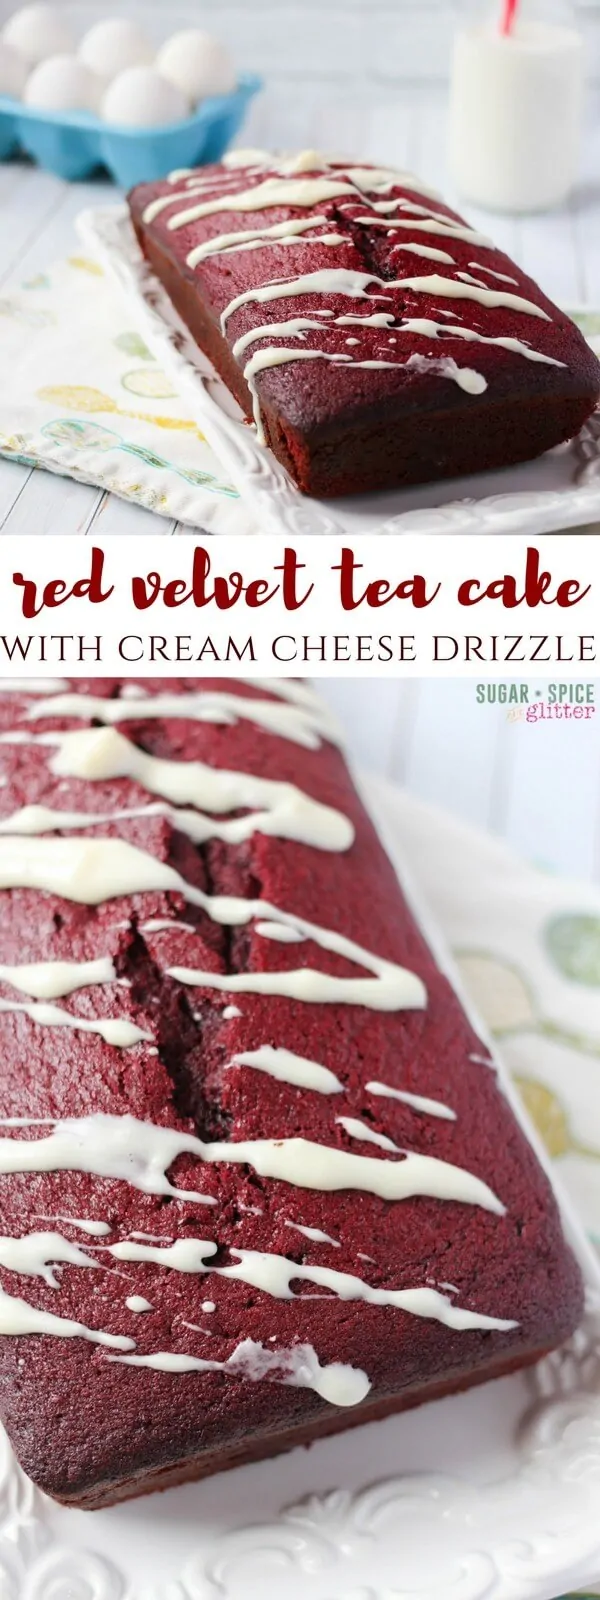 Easy and delicious red velvet tea cake with cream cheese drizzle - this cake uses natural cocoa powder to achieve it's bright red color, you don't even have to use food coloring!